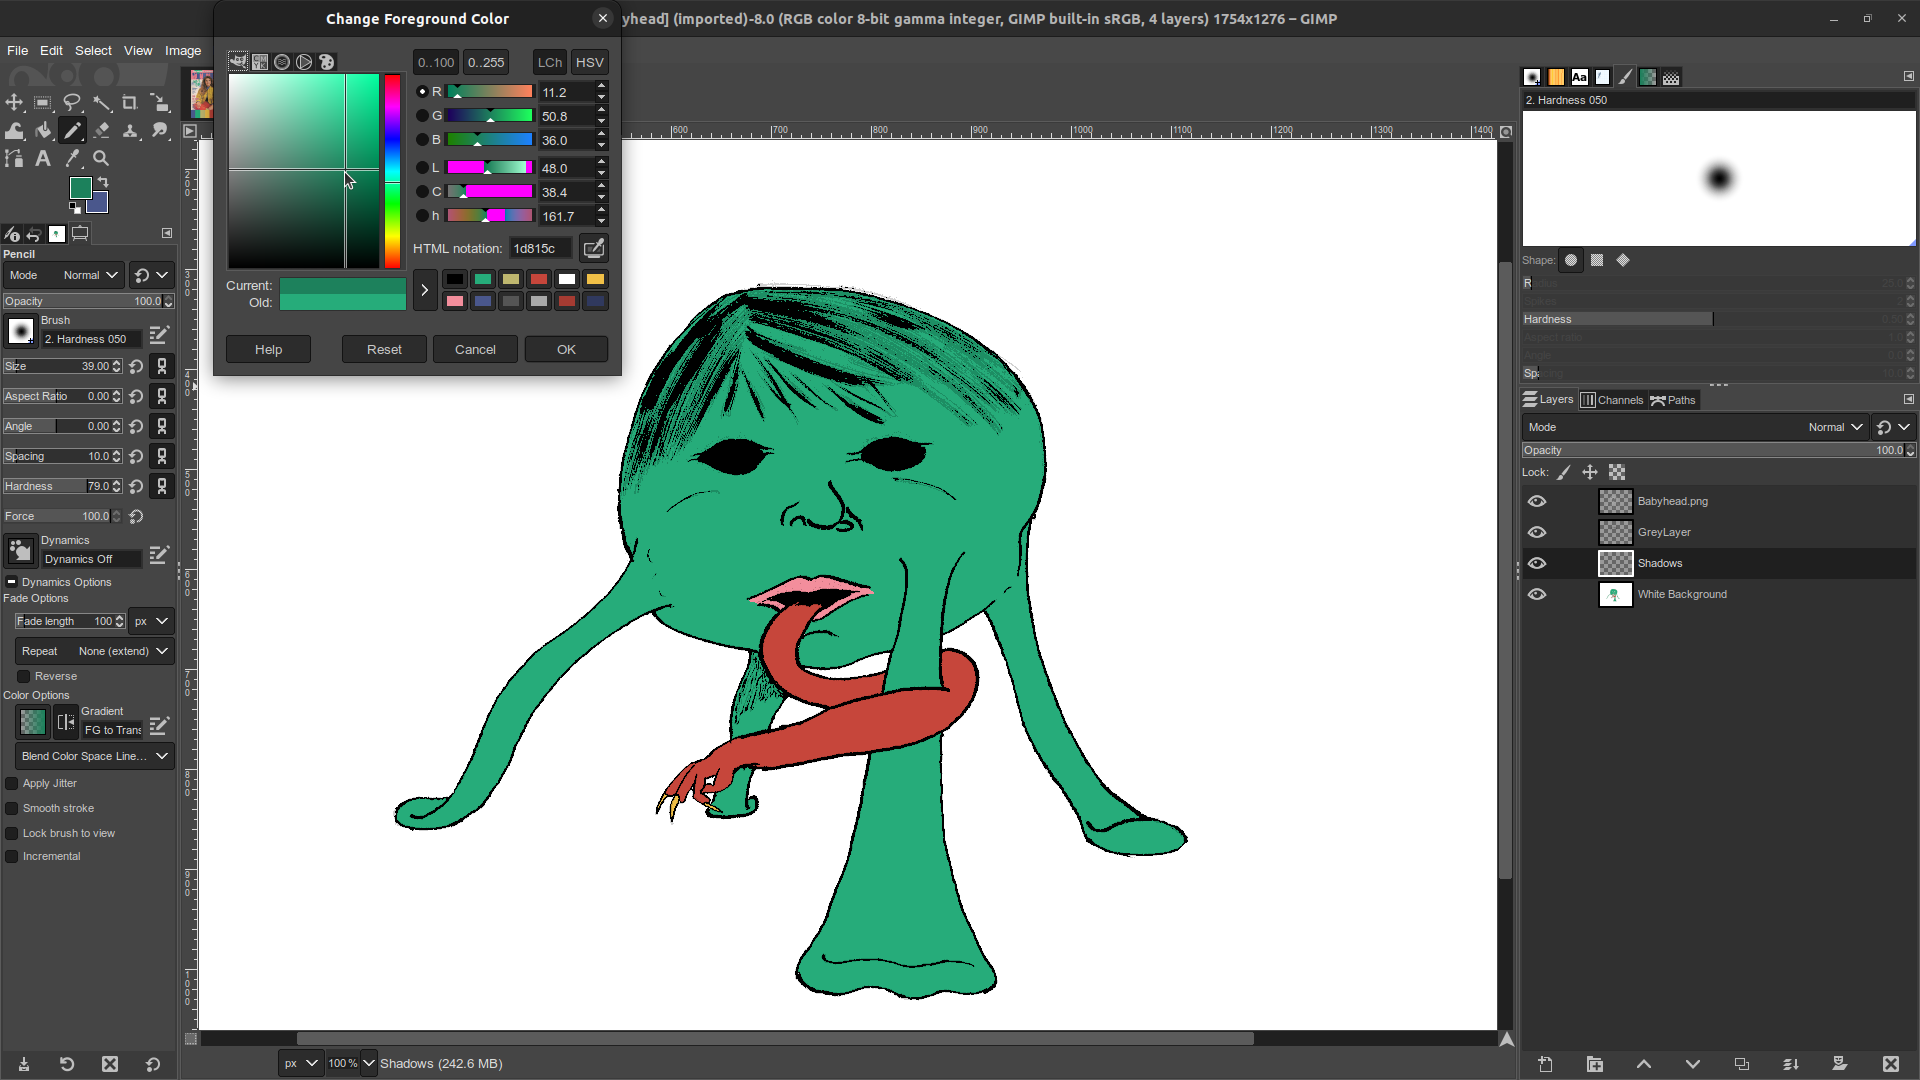 Gimp window in which the Babyhead monster illustration is open. The creature is now fully colored, with gumby-green skin, a red tongue, and pink lips. The color picker dialogue is open, and a color of green similar to the creature's skin, but much darker, is selected.